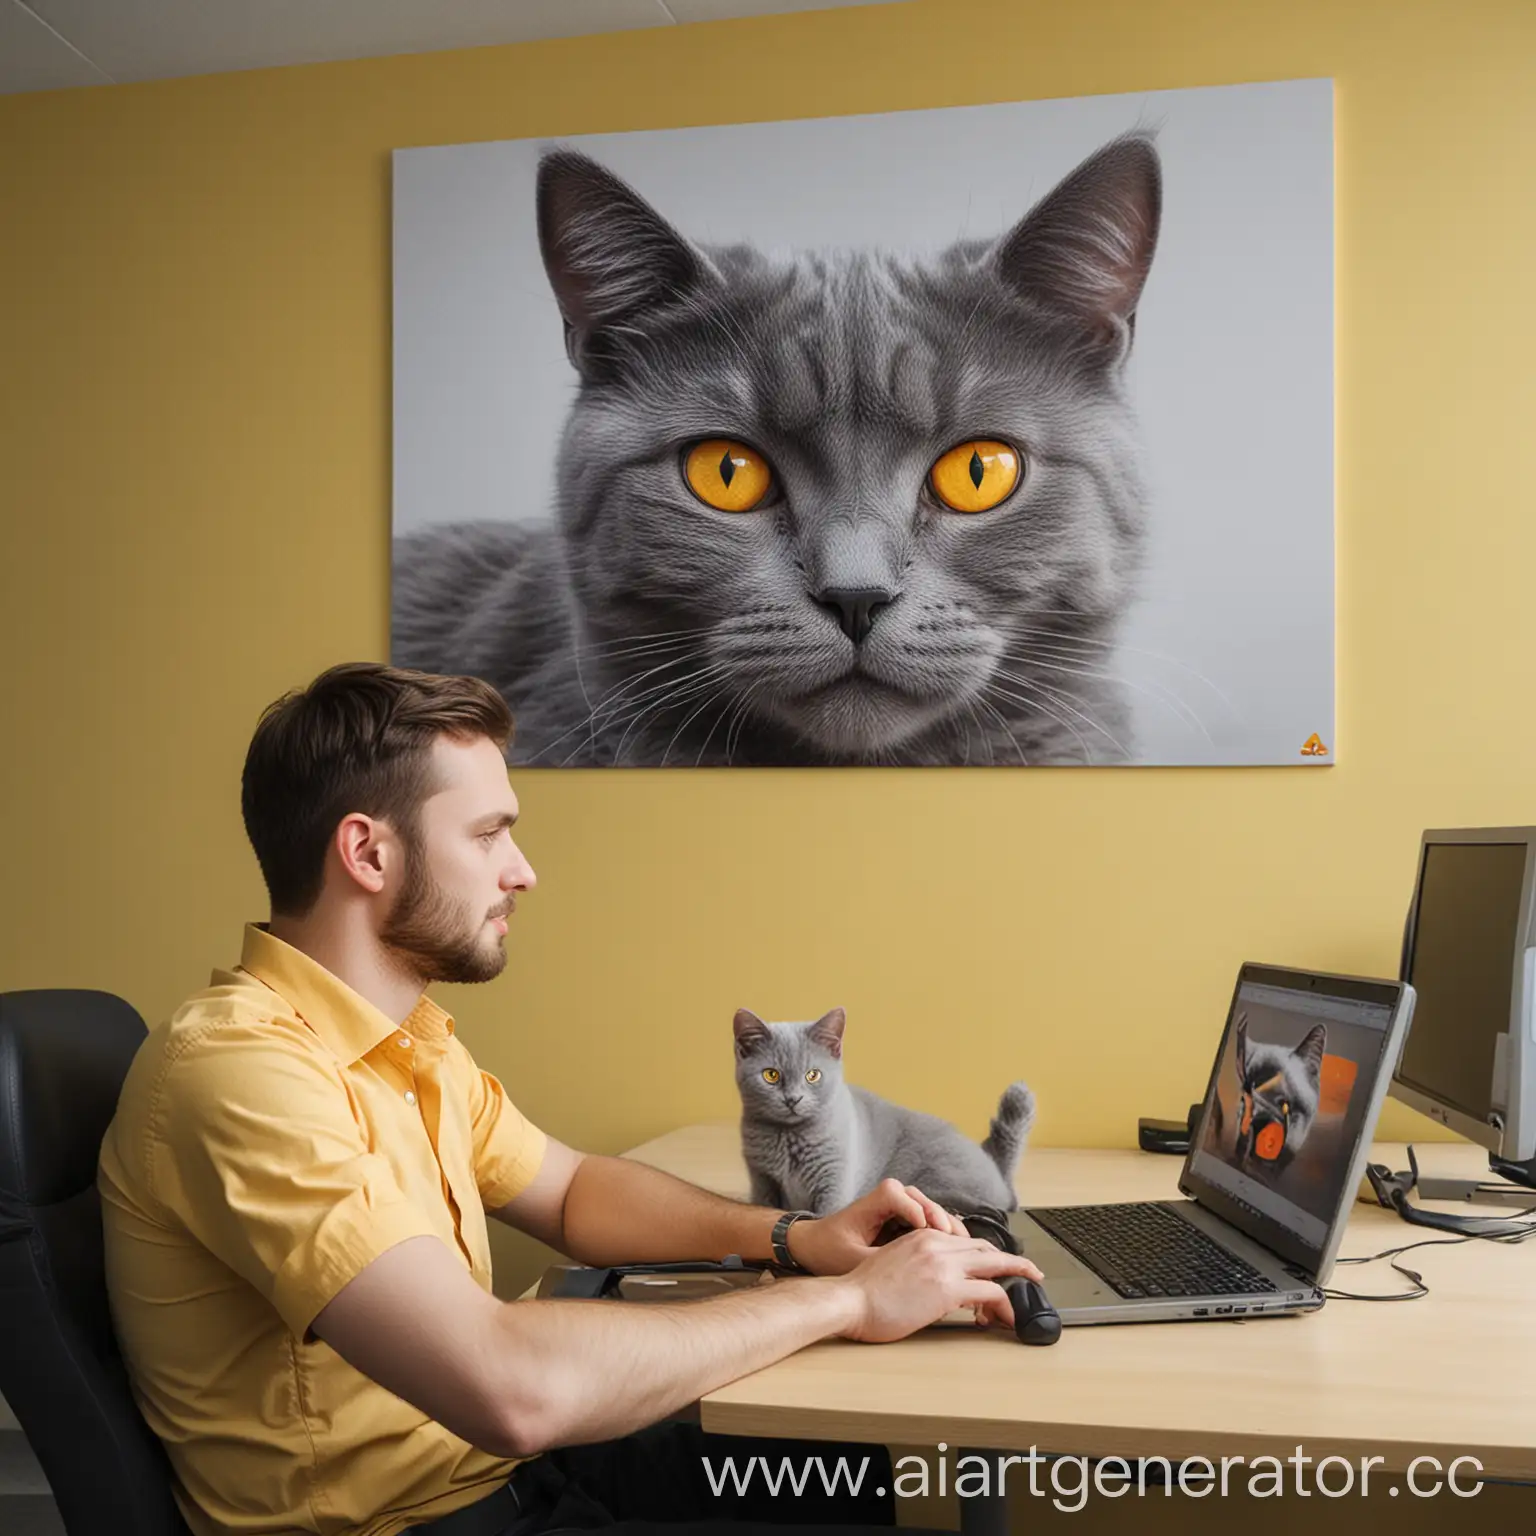 Man-Working-in-Yellowthemed-Yandex-Office-with-Cat